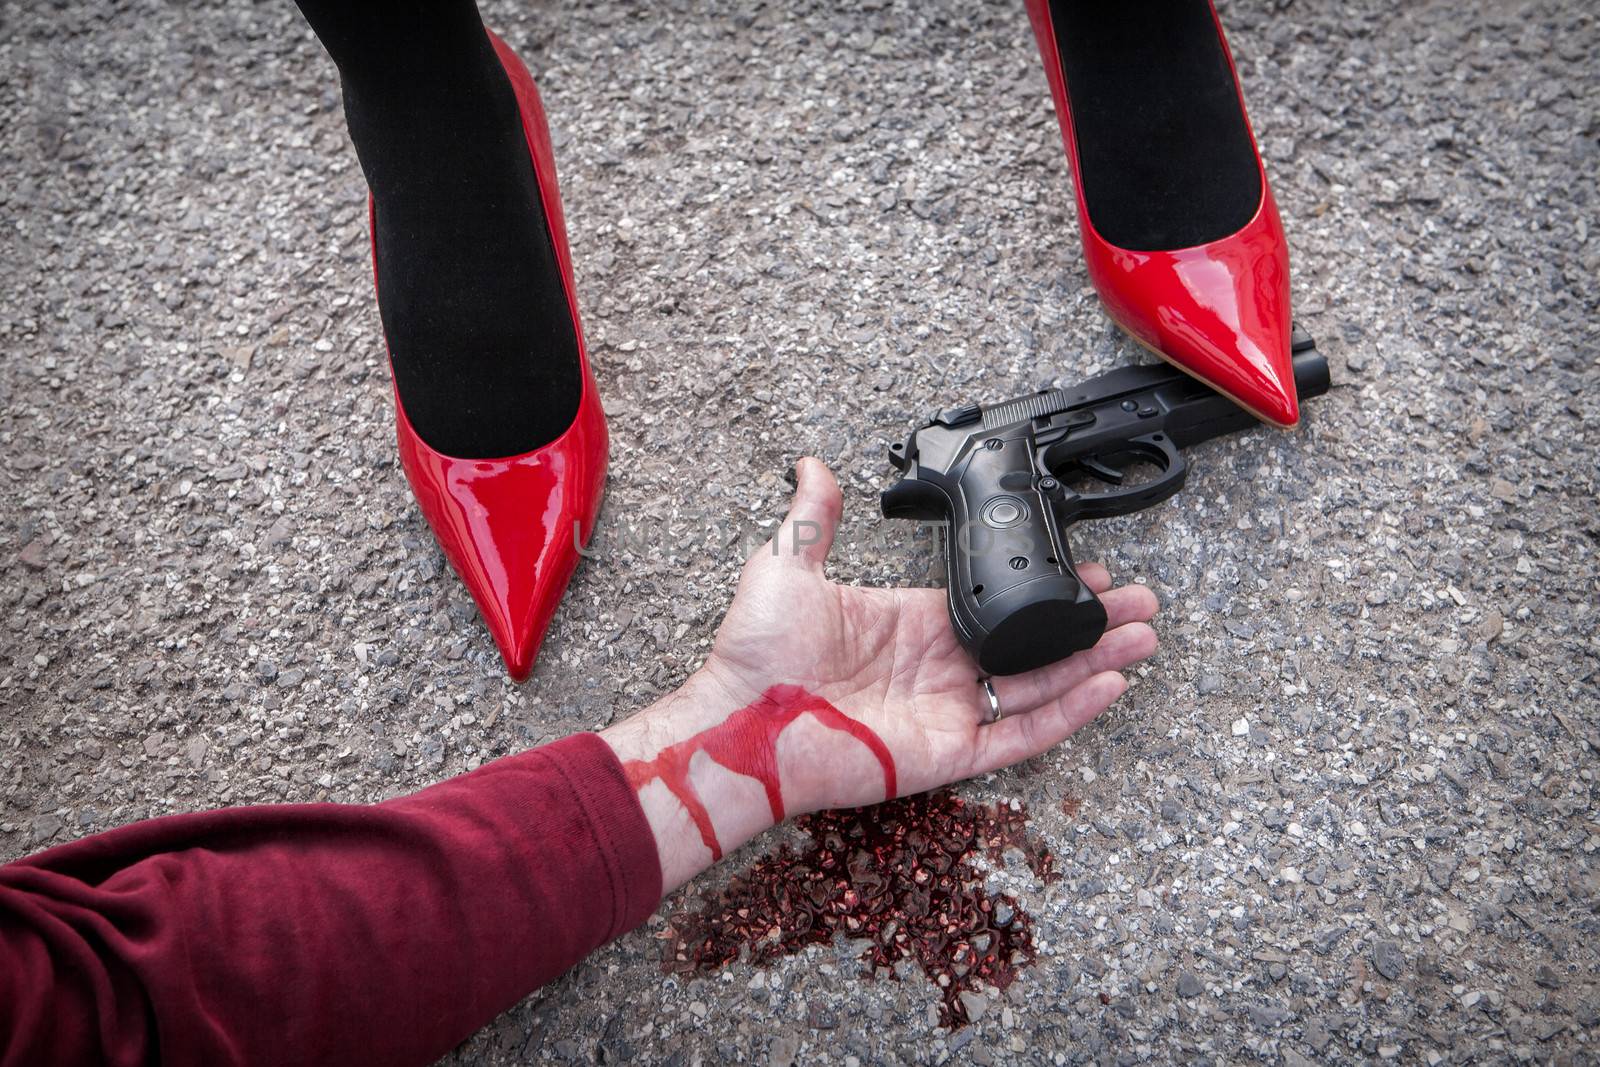 Man is dominated by a woman with red shoes by digicomphoto